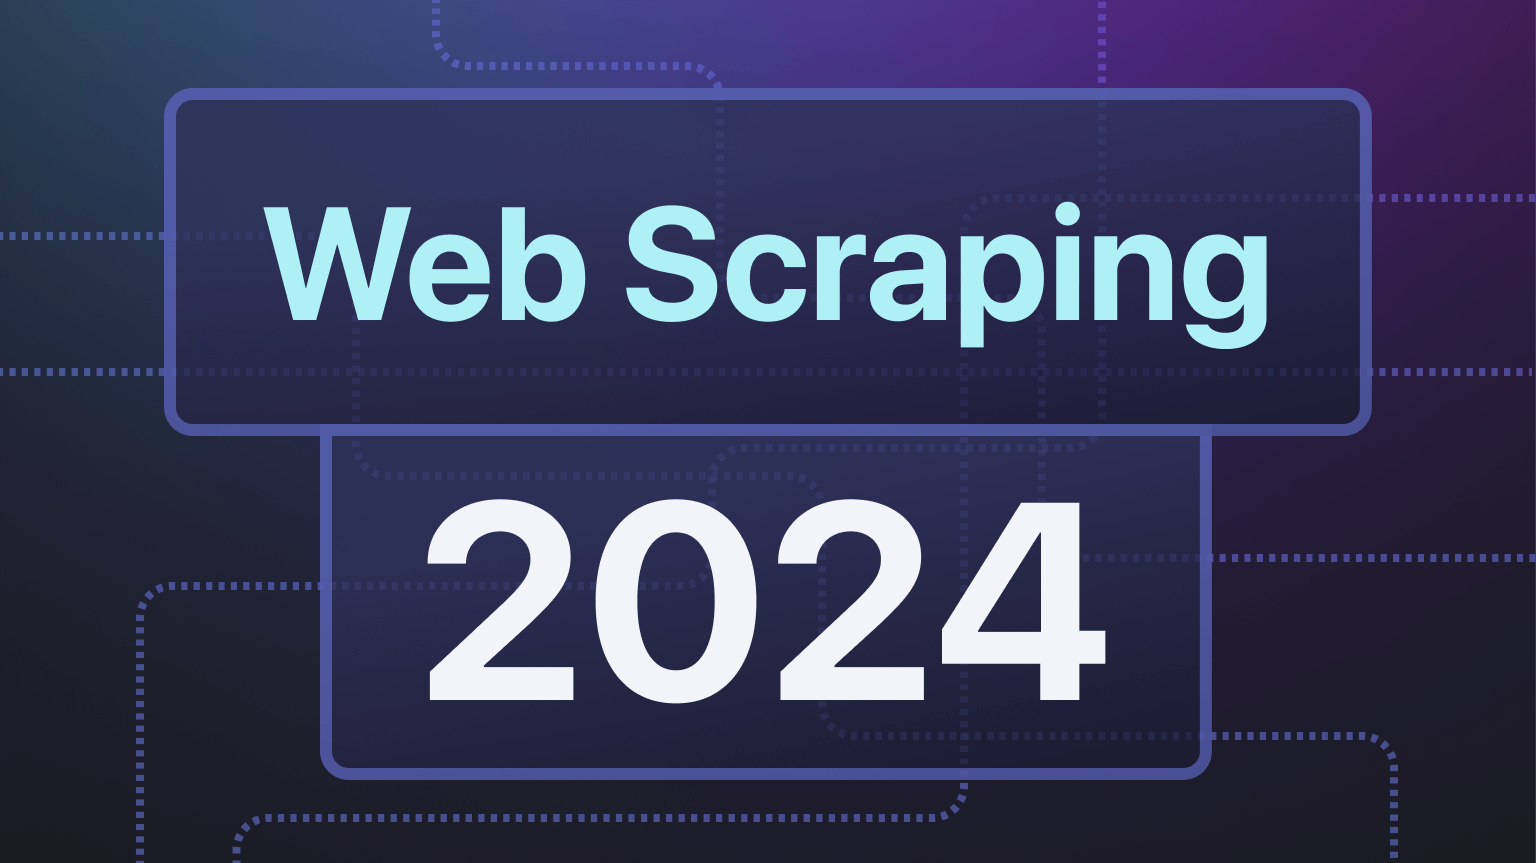 State of web scraping in 2024